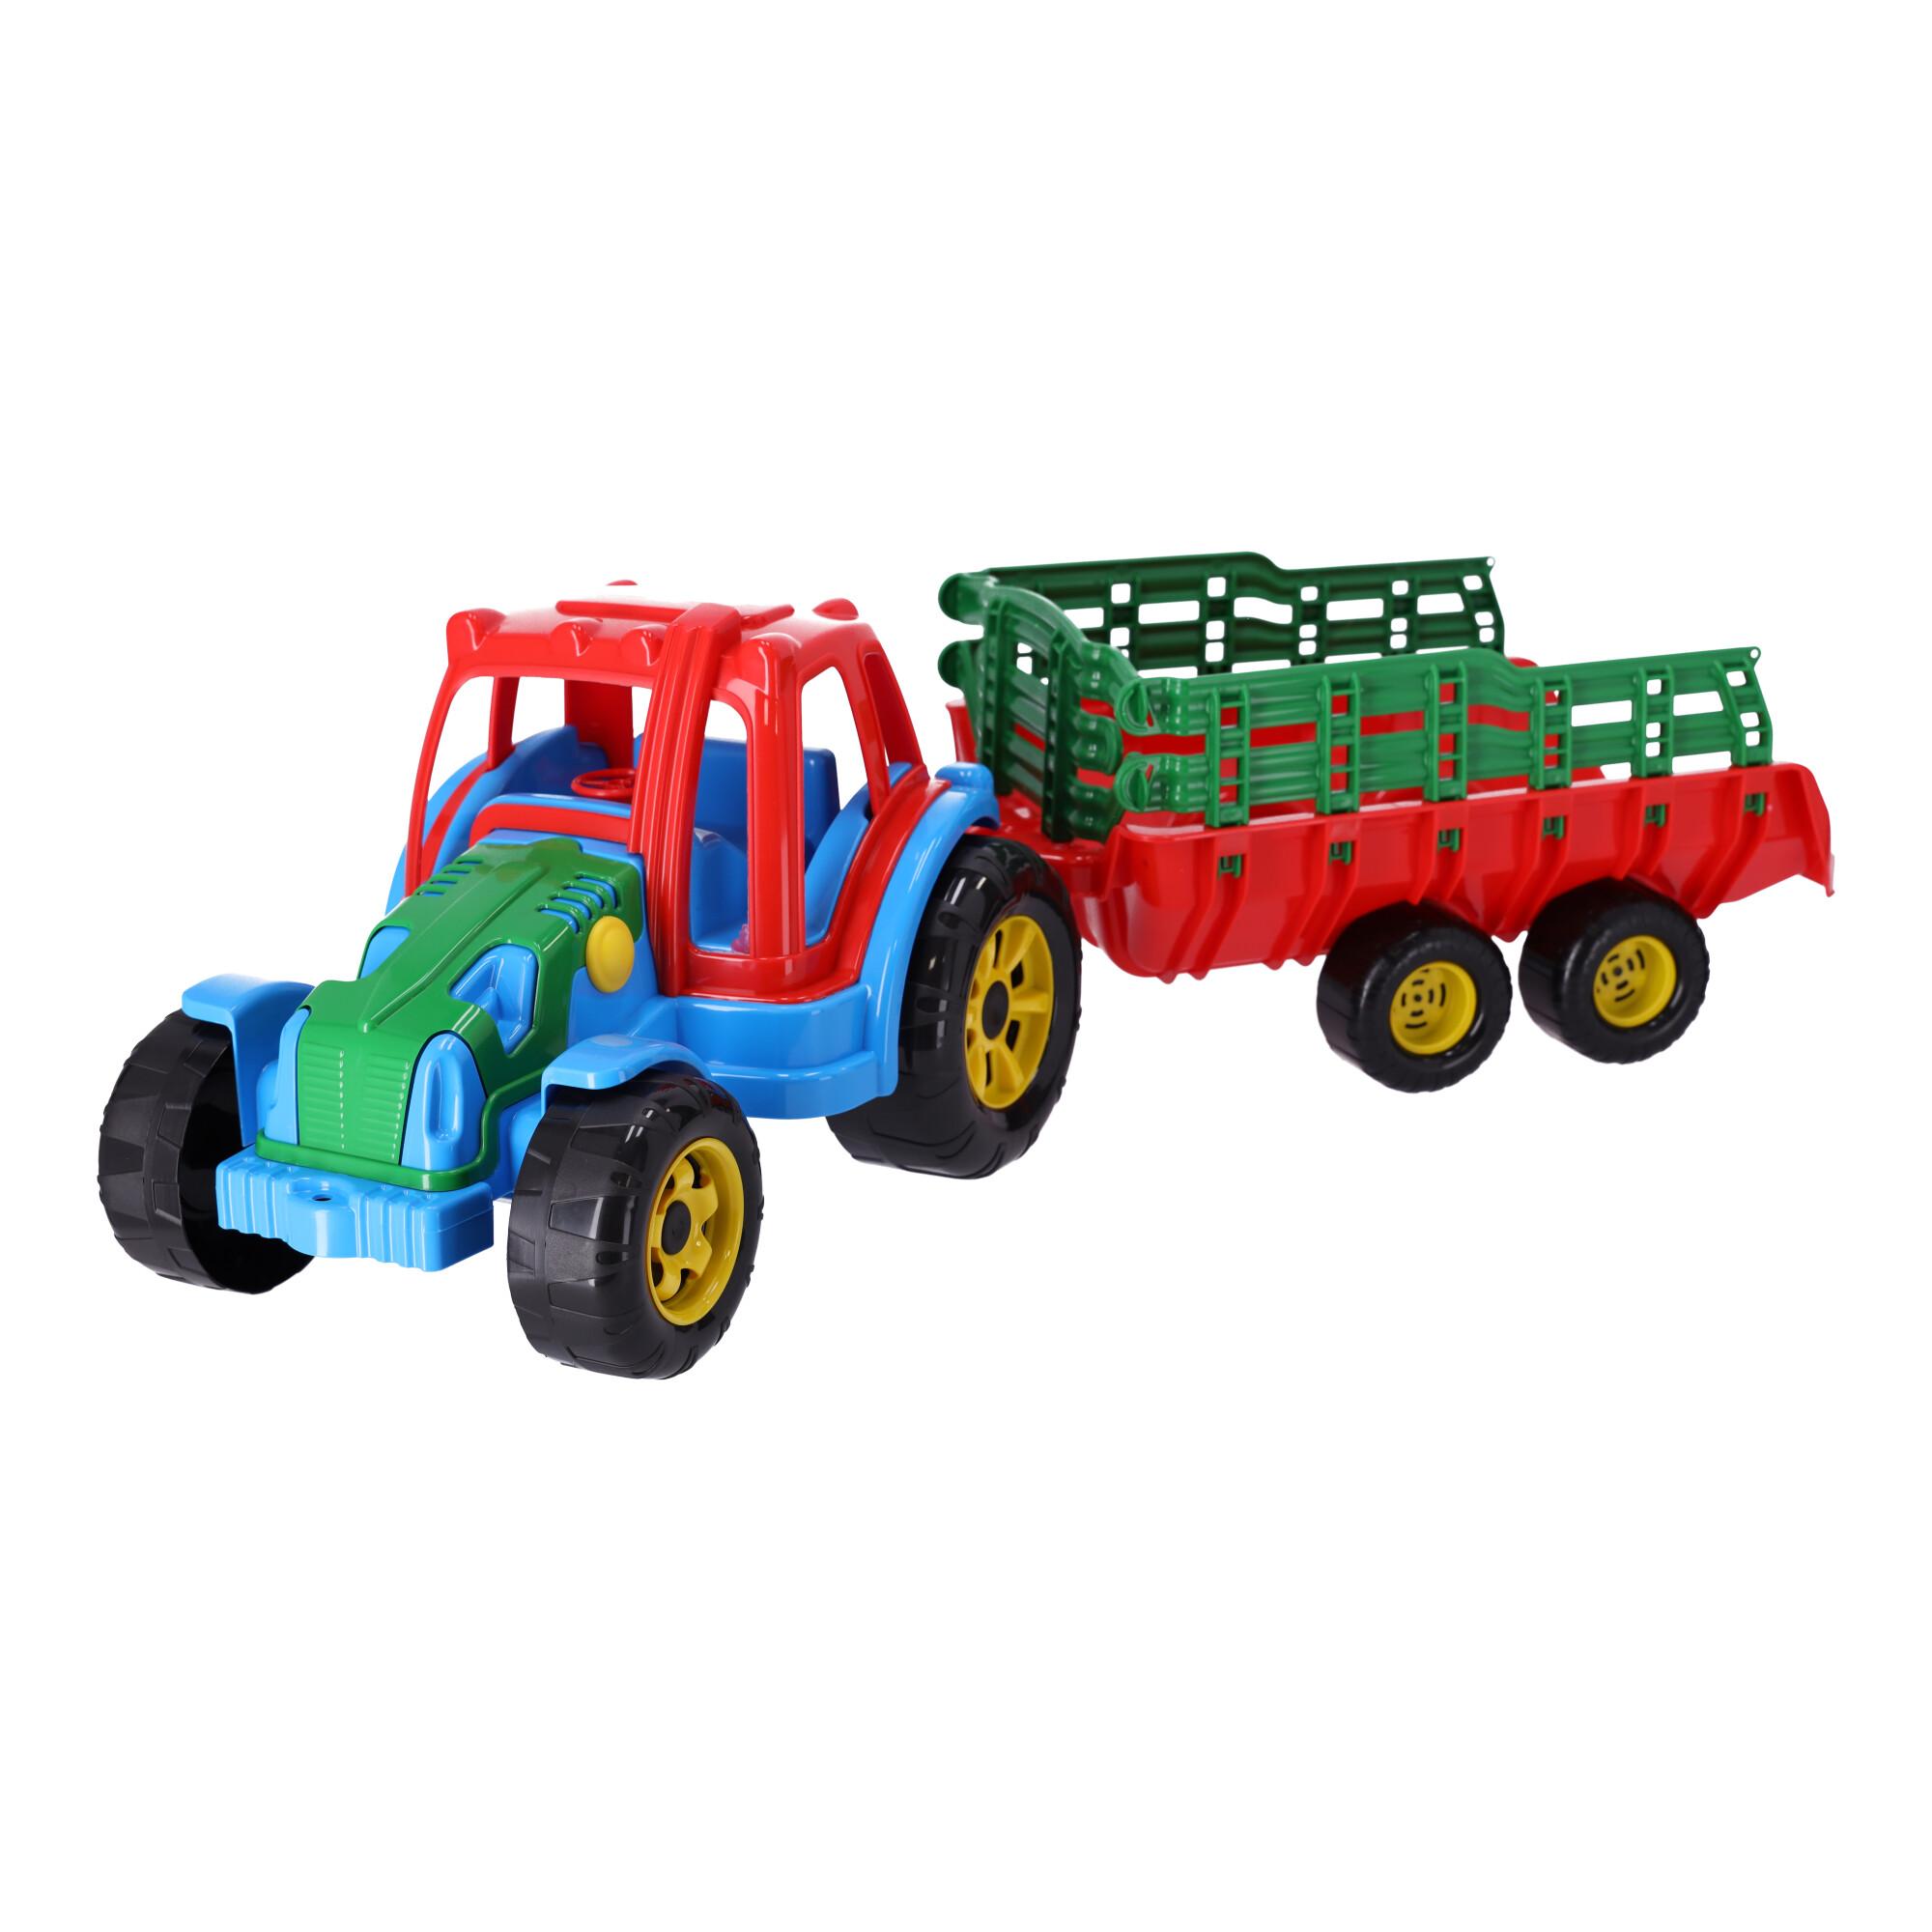 Tractor with trailer - model 299